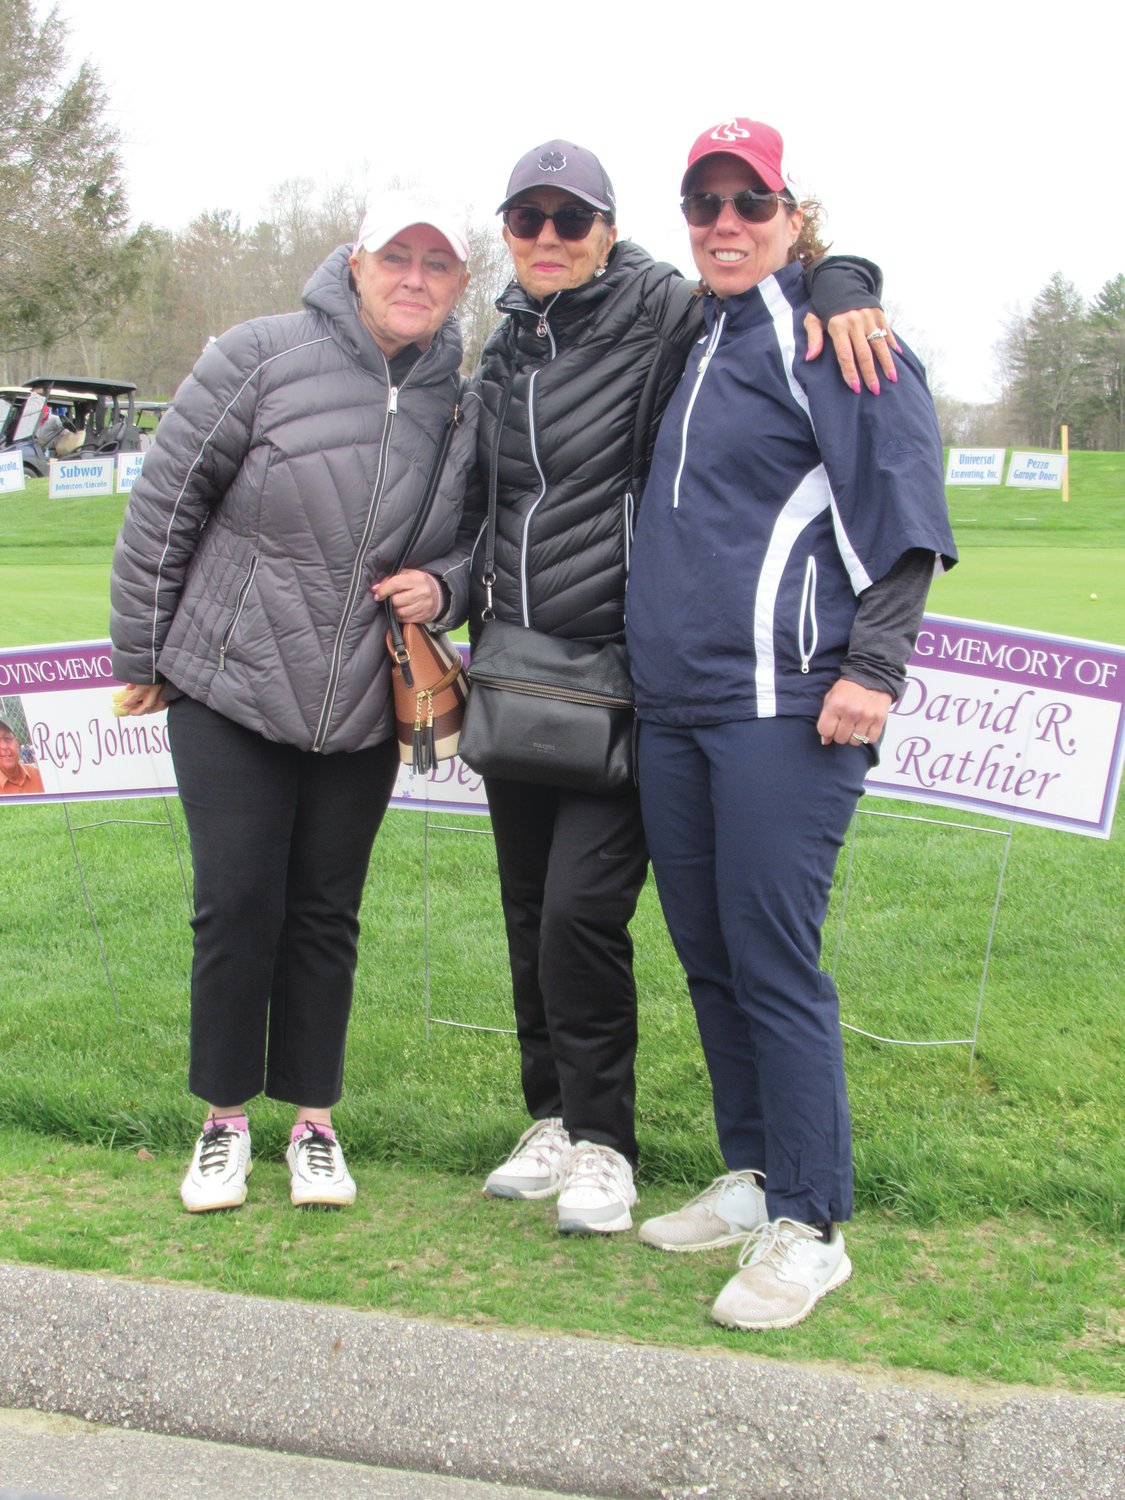 LADIES LINK: Laure Young, Valerie Money and Cathy Massemino were among the many players who were dressed for cold weather garb to play in Saturday’s 15th annual JMCE Memorial Golf Tournament at Connecticut National Golf Club in Putnam, Ct.